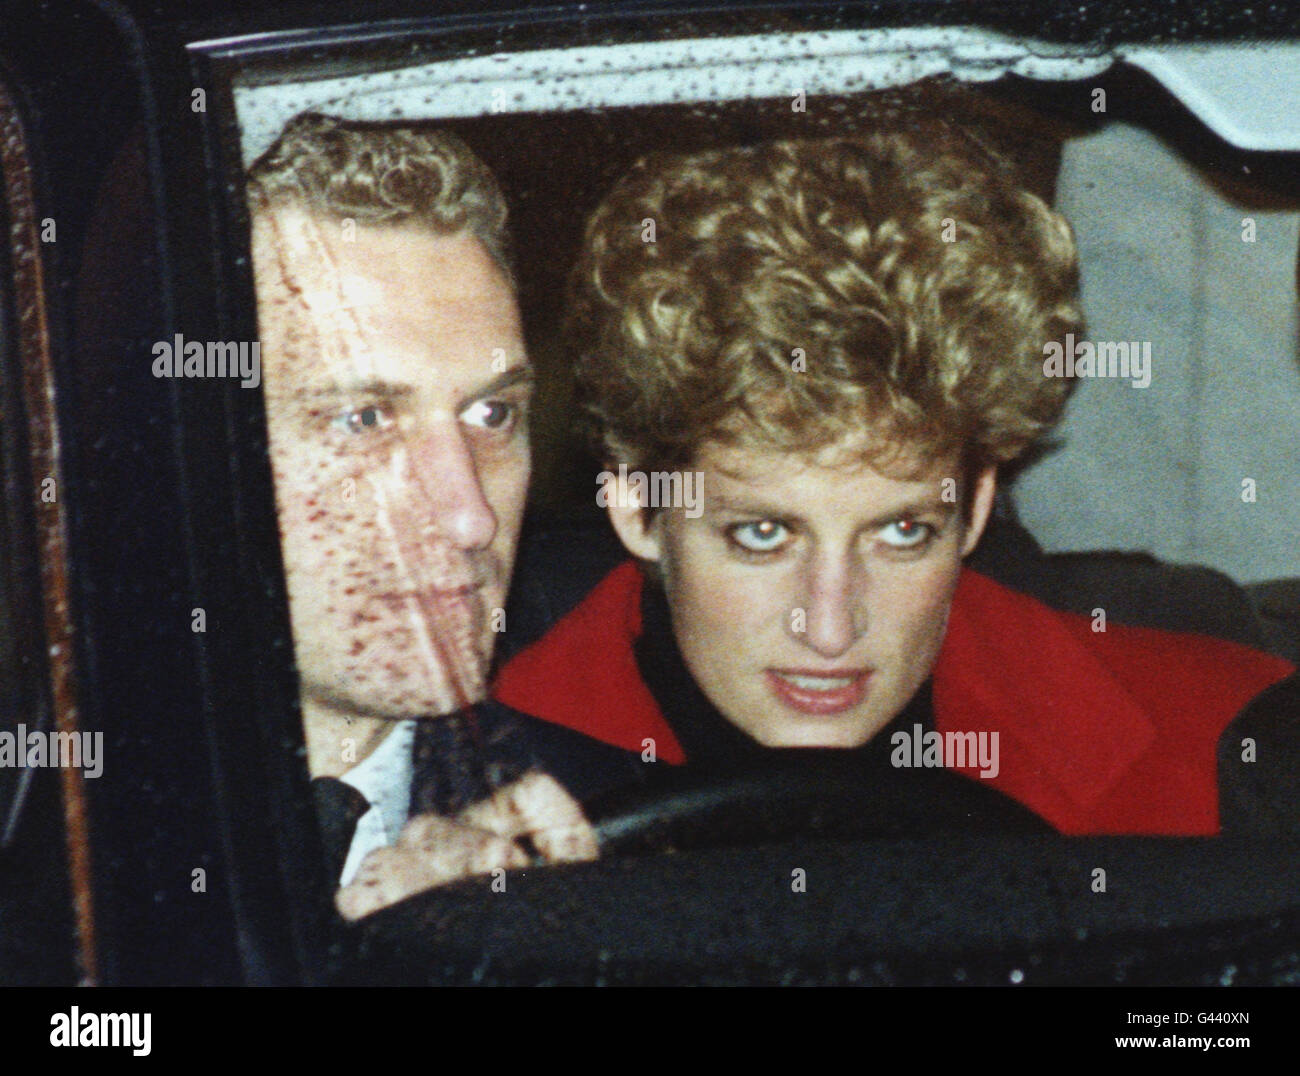 Library file of the Princess of Wales with chauffeur Steve Davis, who left her staff today (Tuesday), joining her private secretary Patrick Jephson and secretary Nicky Cockell, who have both resigned in the last two days. Stock Photo